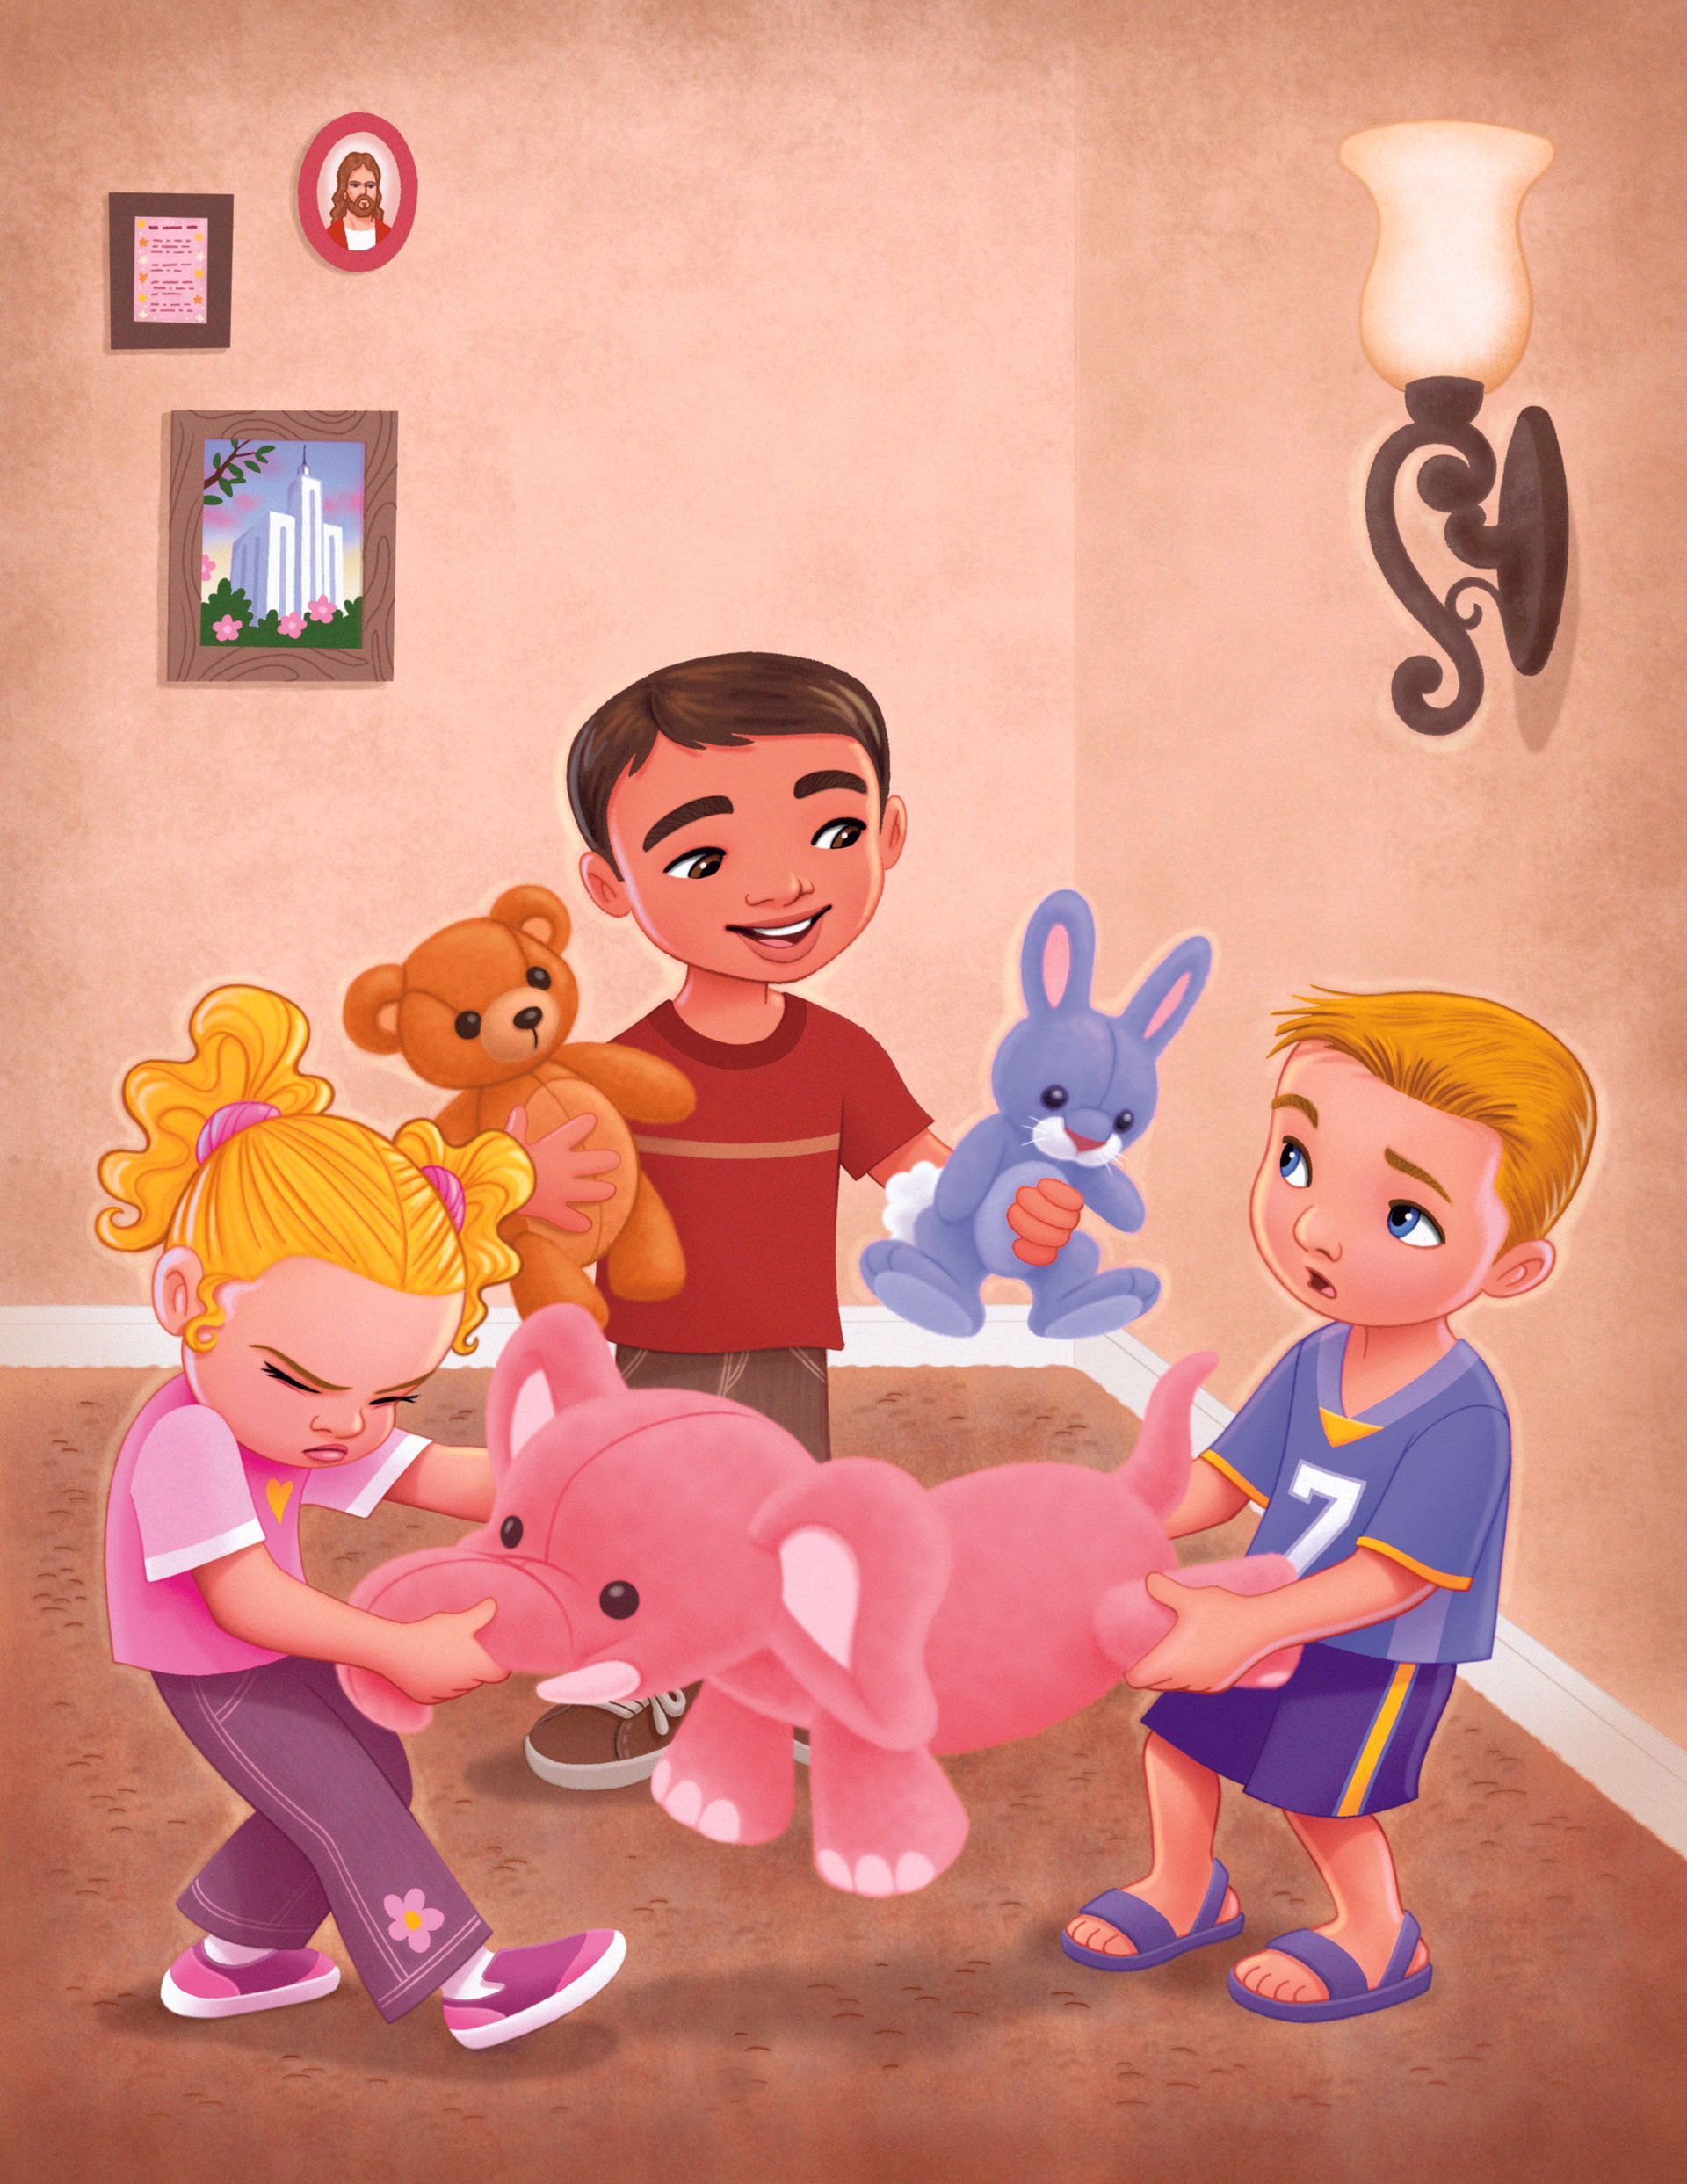 Siblings fight over a pink stuffed elephant while a friend tries to offer them different stuffed animals.